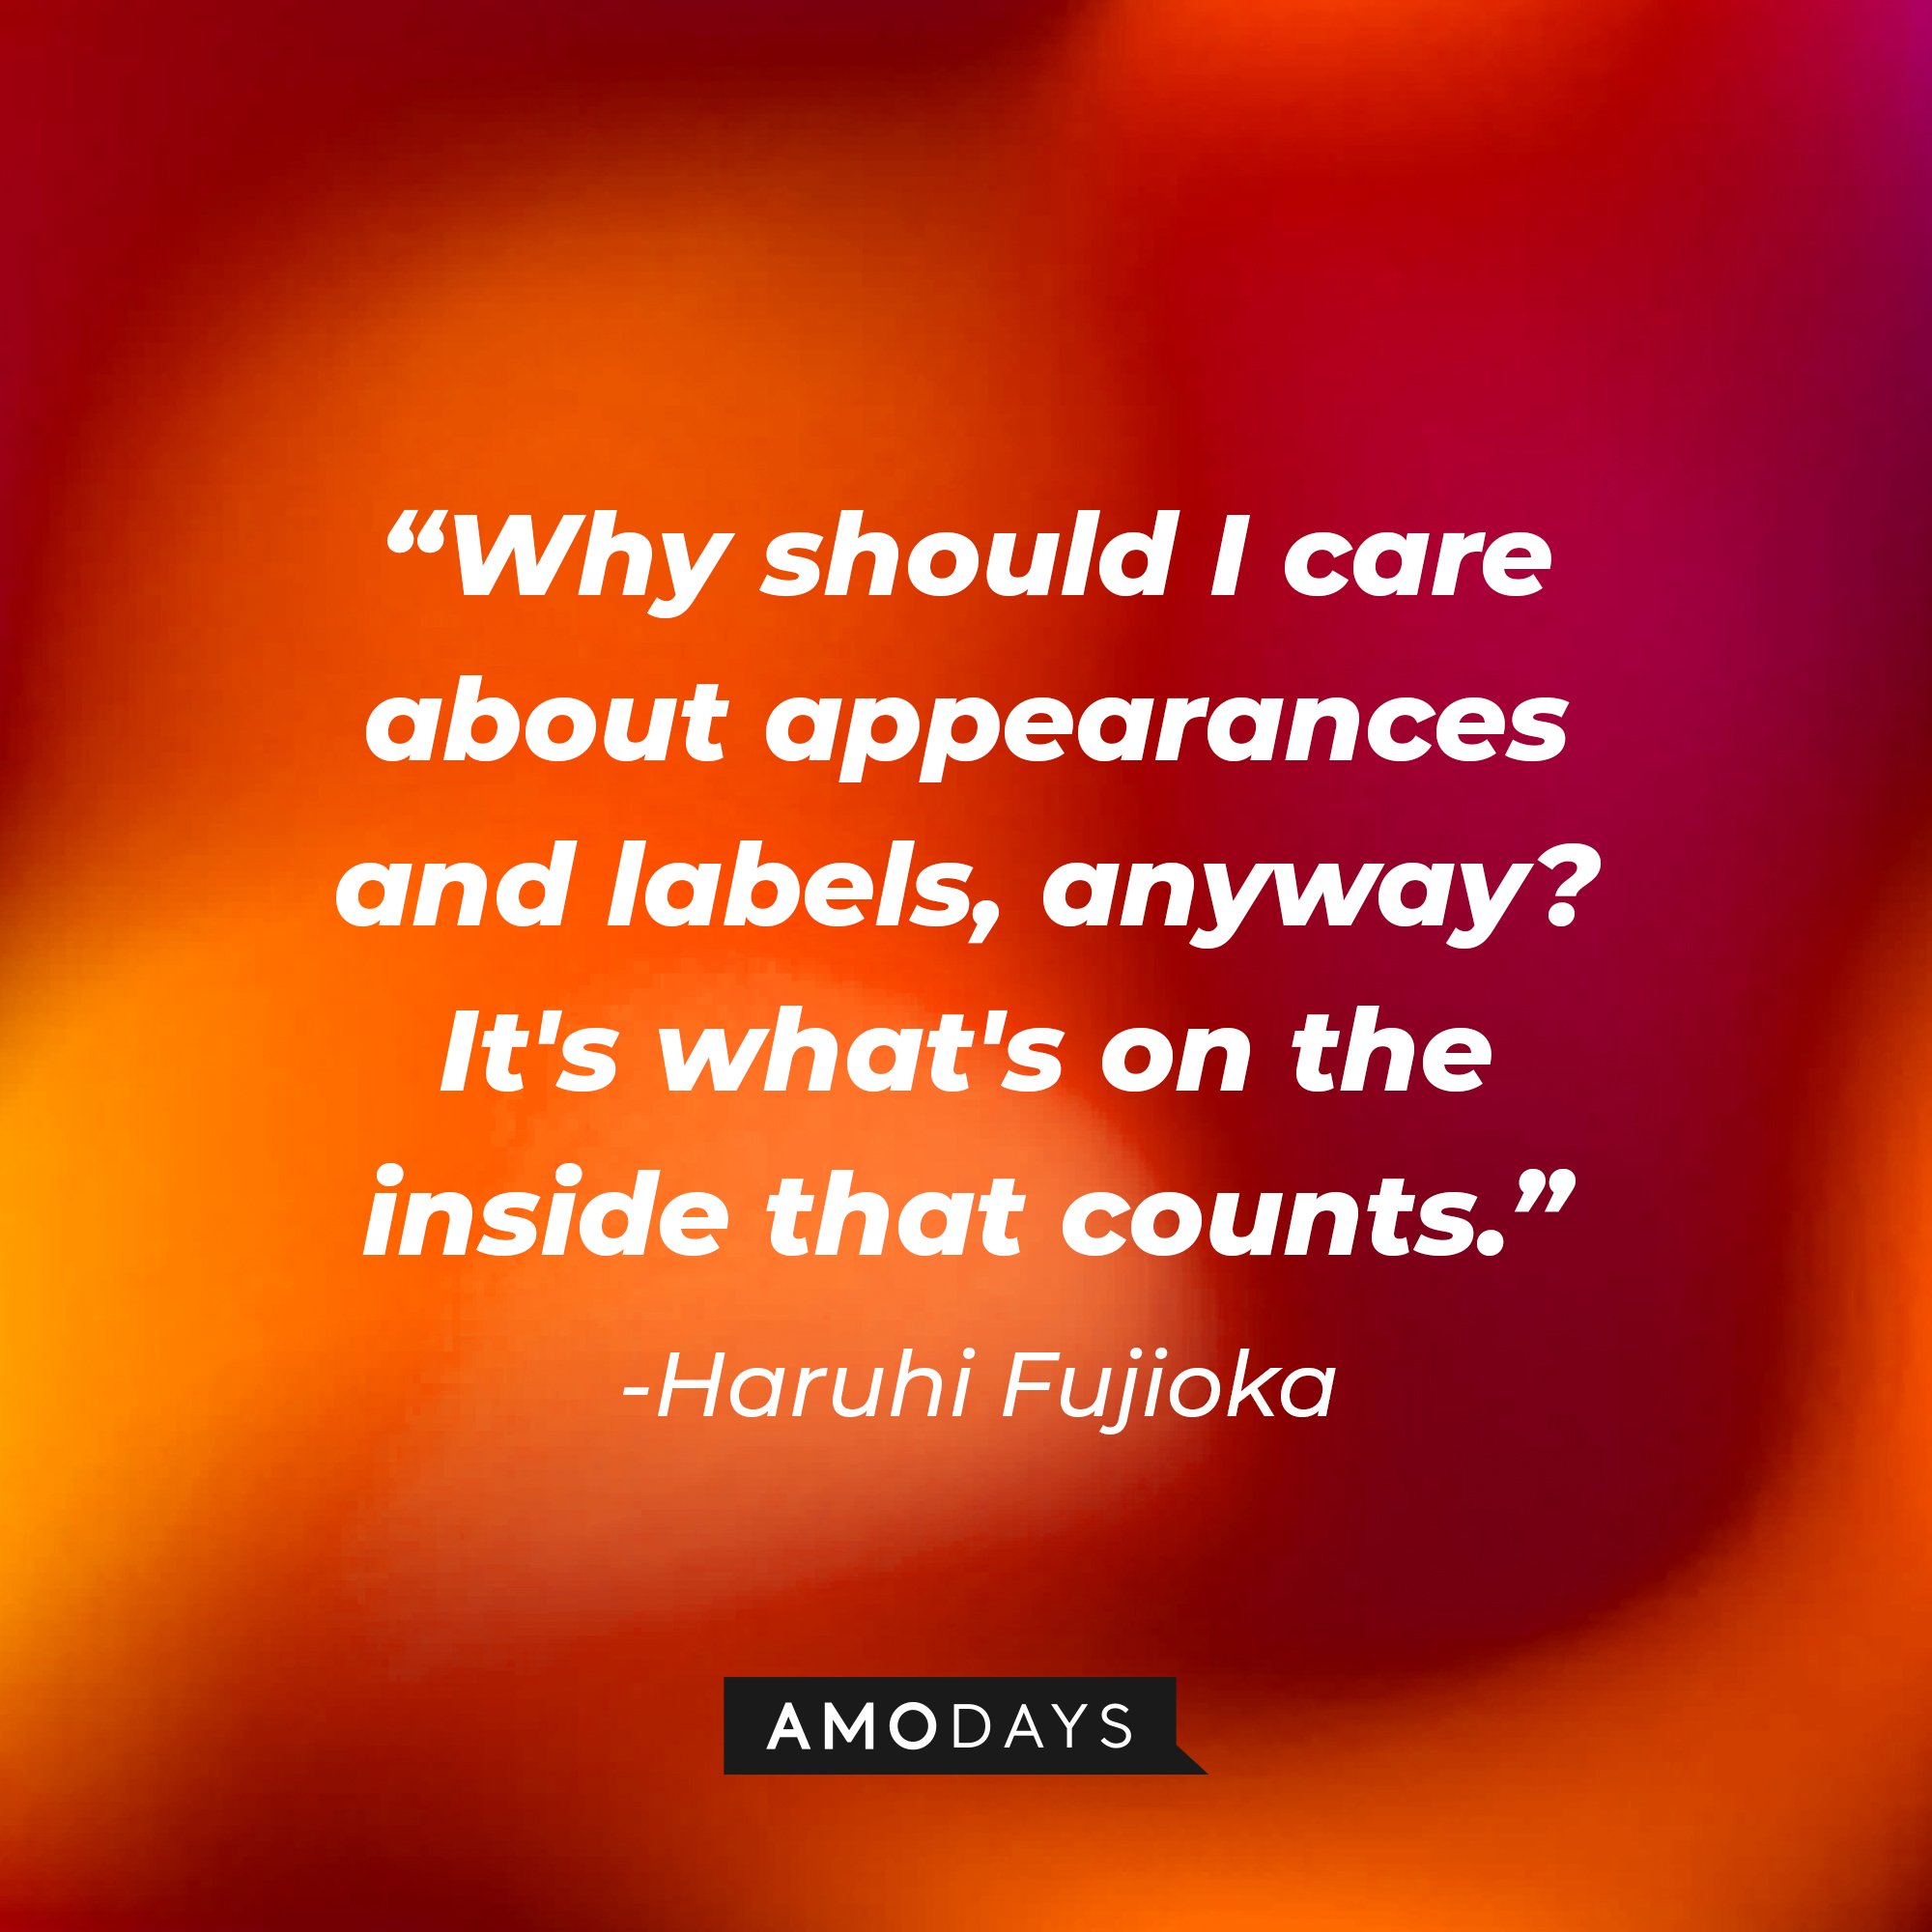 Haruhi Fujioka’s quote: "Why should I care about appearances and labels, anyway? It's what's on the inside that counts."  | Image: AmoDays